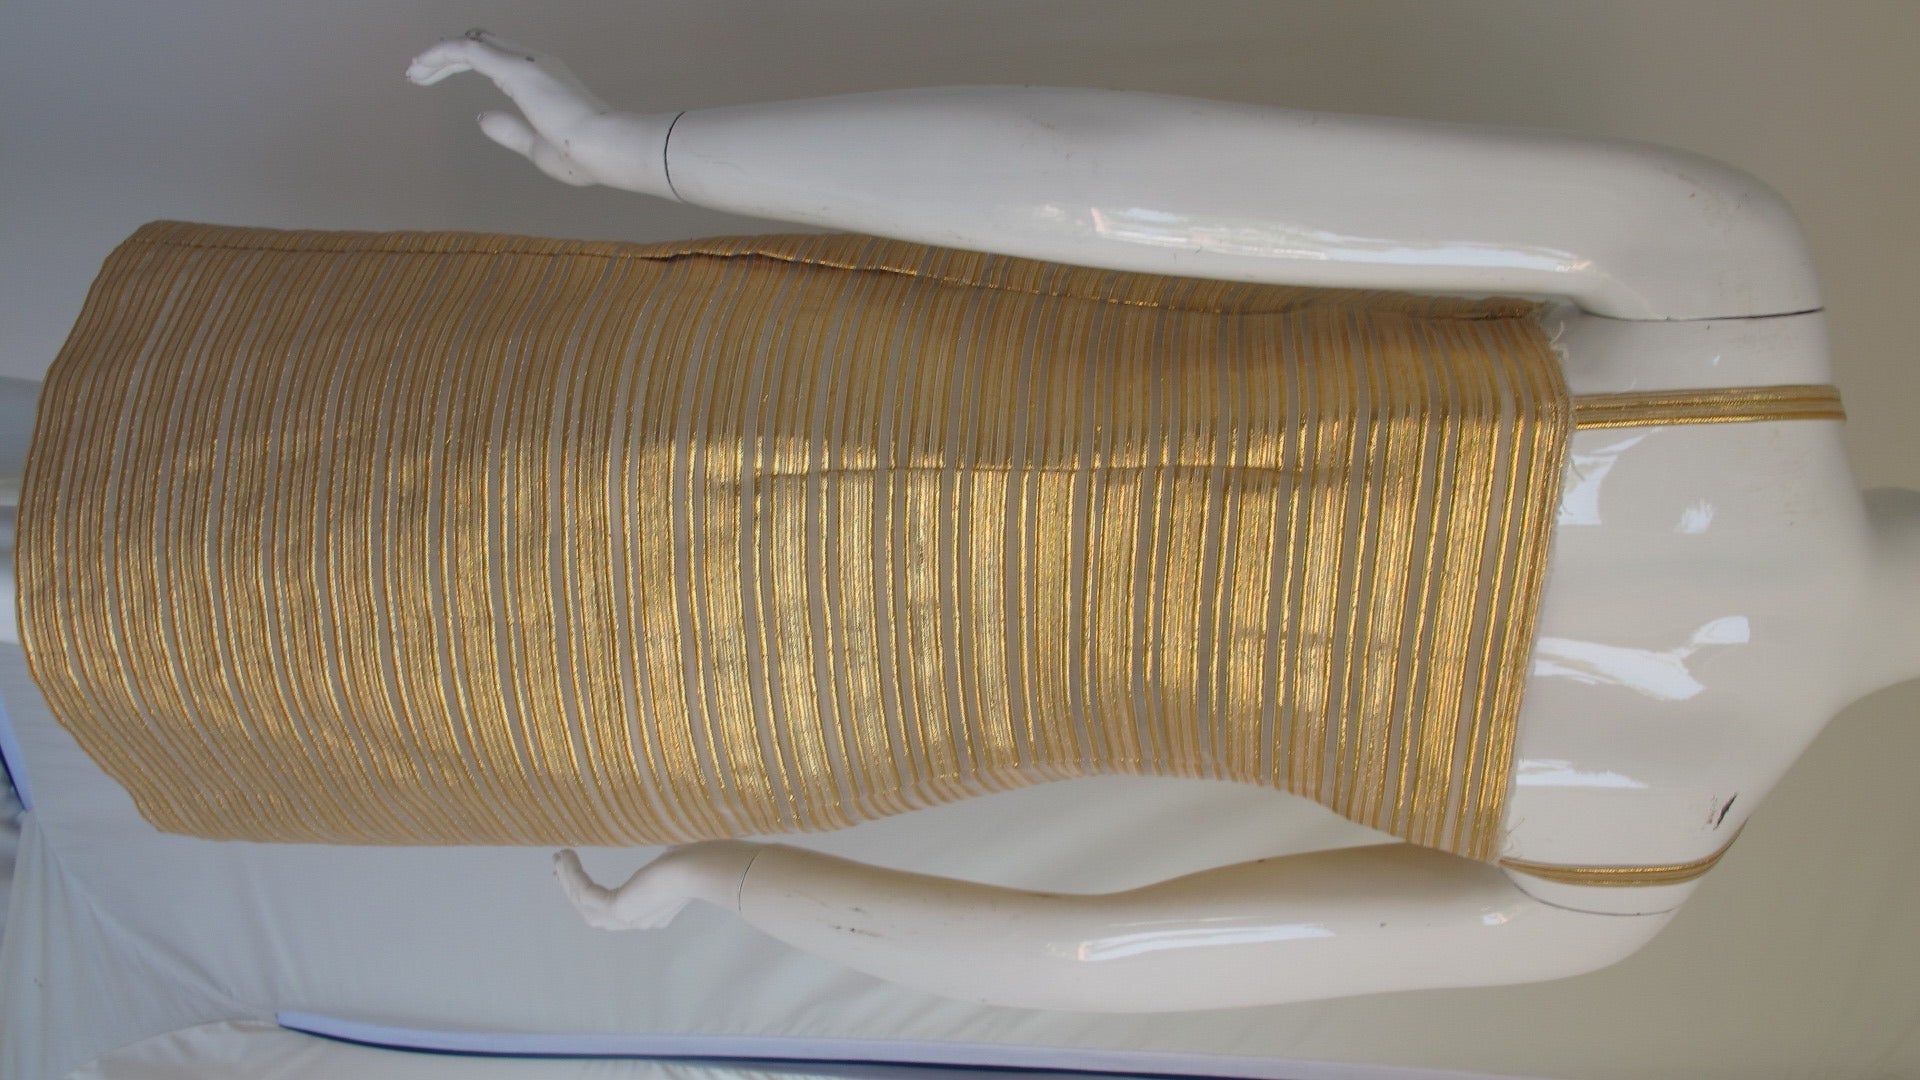 A Missoni Metallic Gold & Creme Striped Cocktail Dress w/Original Tags In Excellent Condition For Sale In Studio City, CA